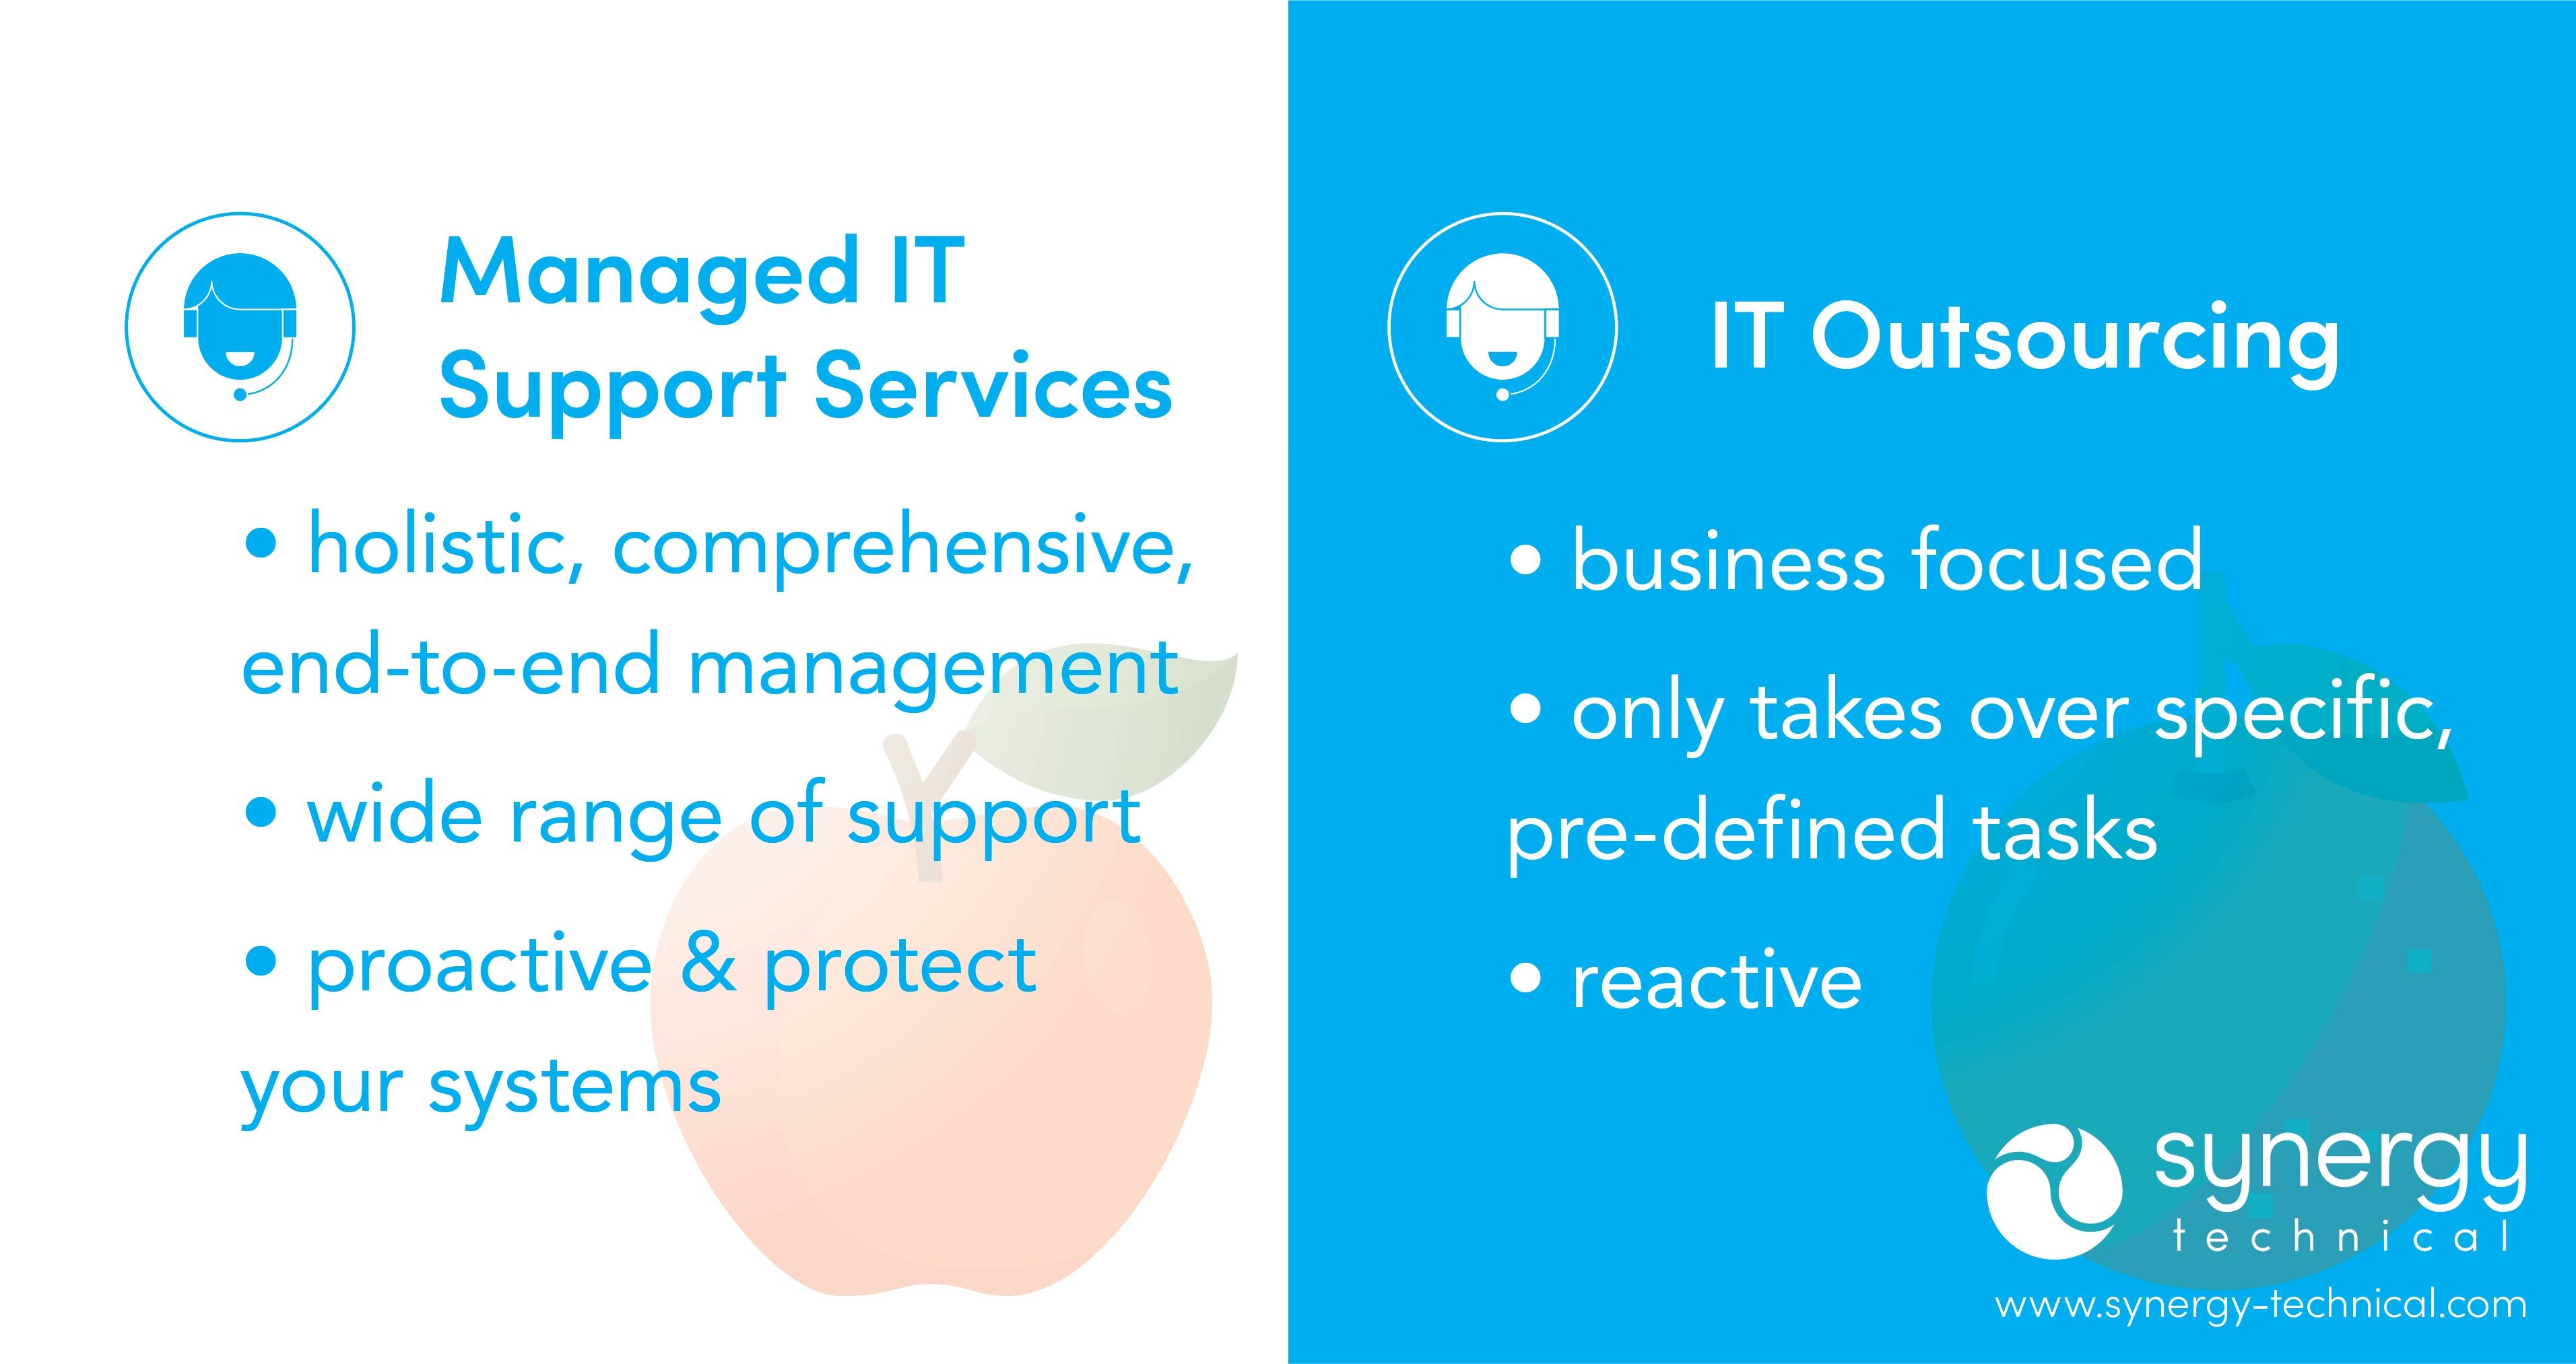 IT Outsourcing vs. Managed IT Support Services T-Chart